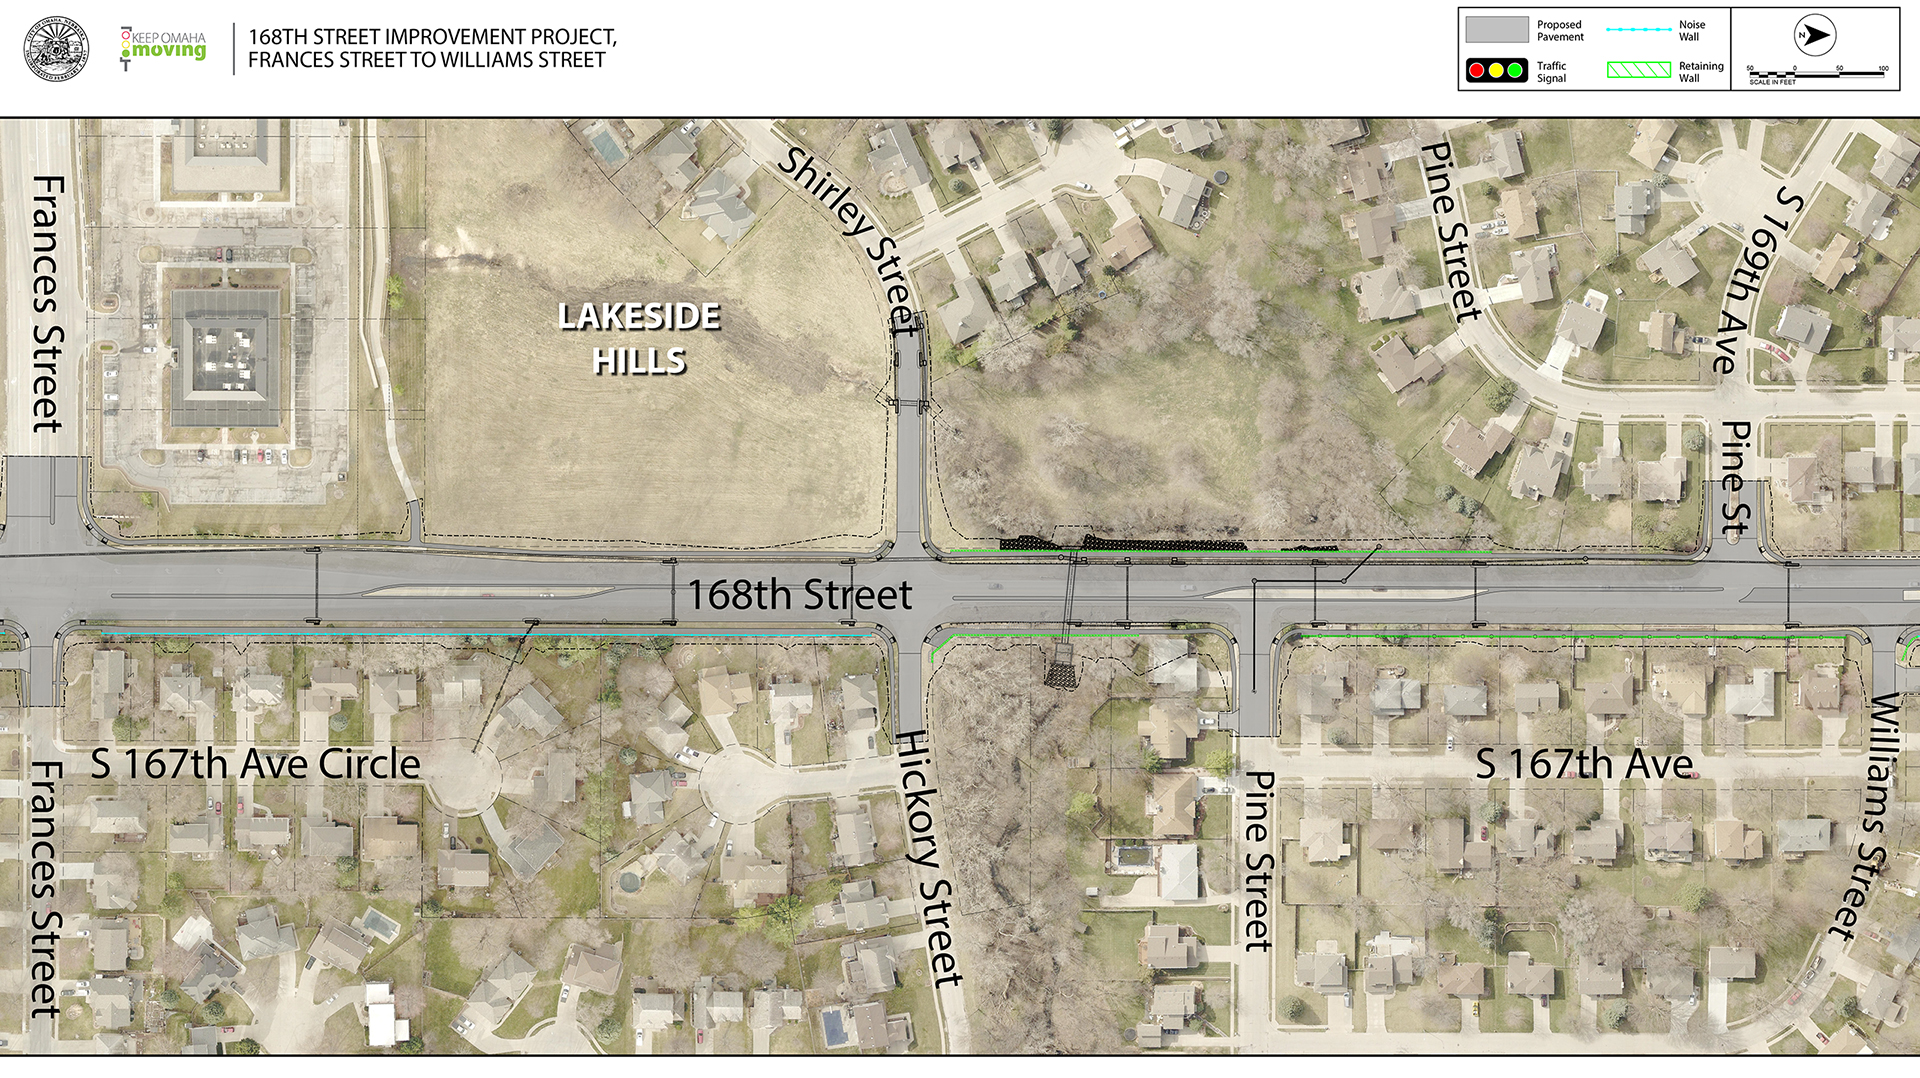 Project Segment: North of Frances Street to just north of William Street